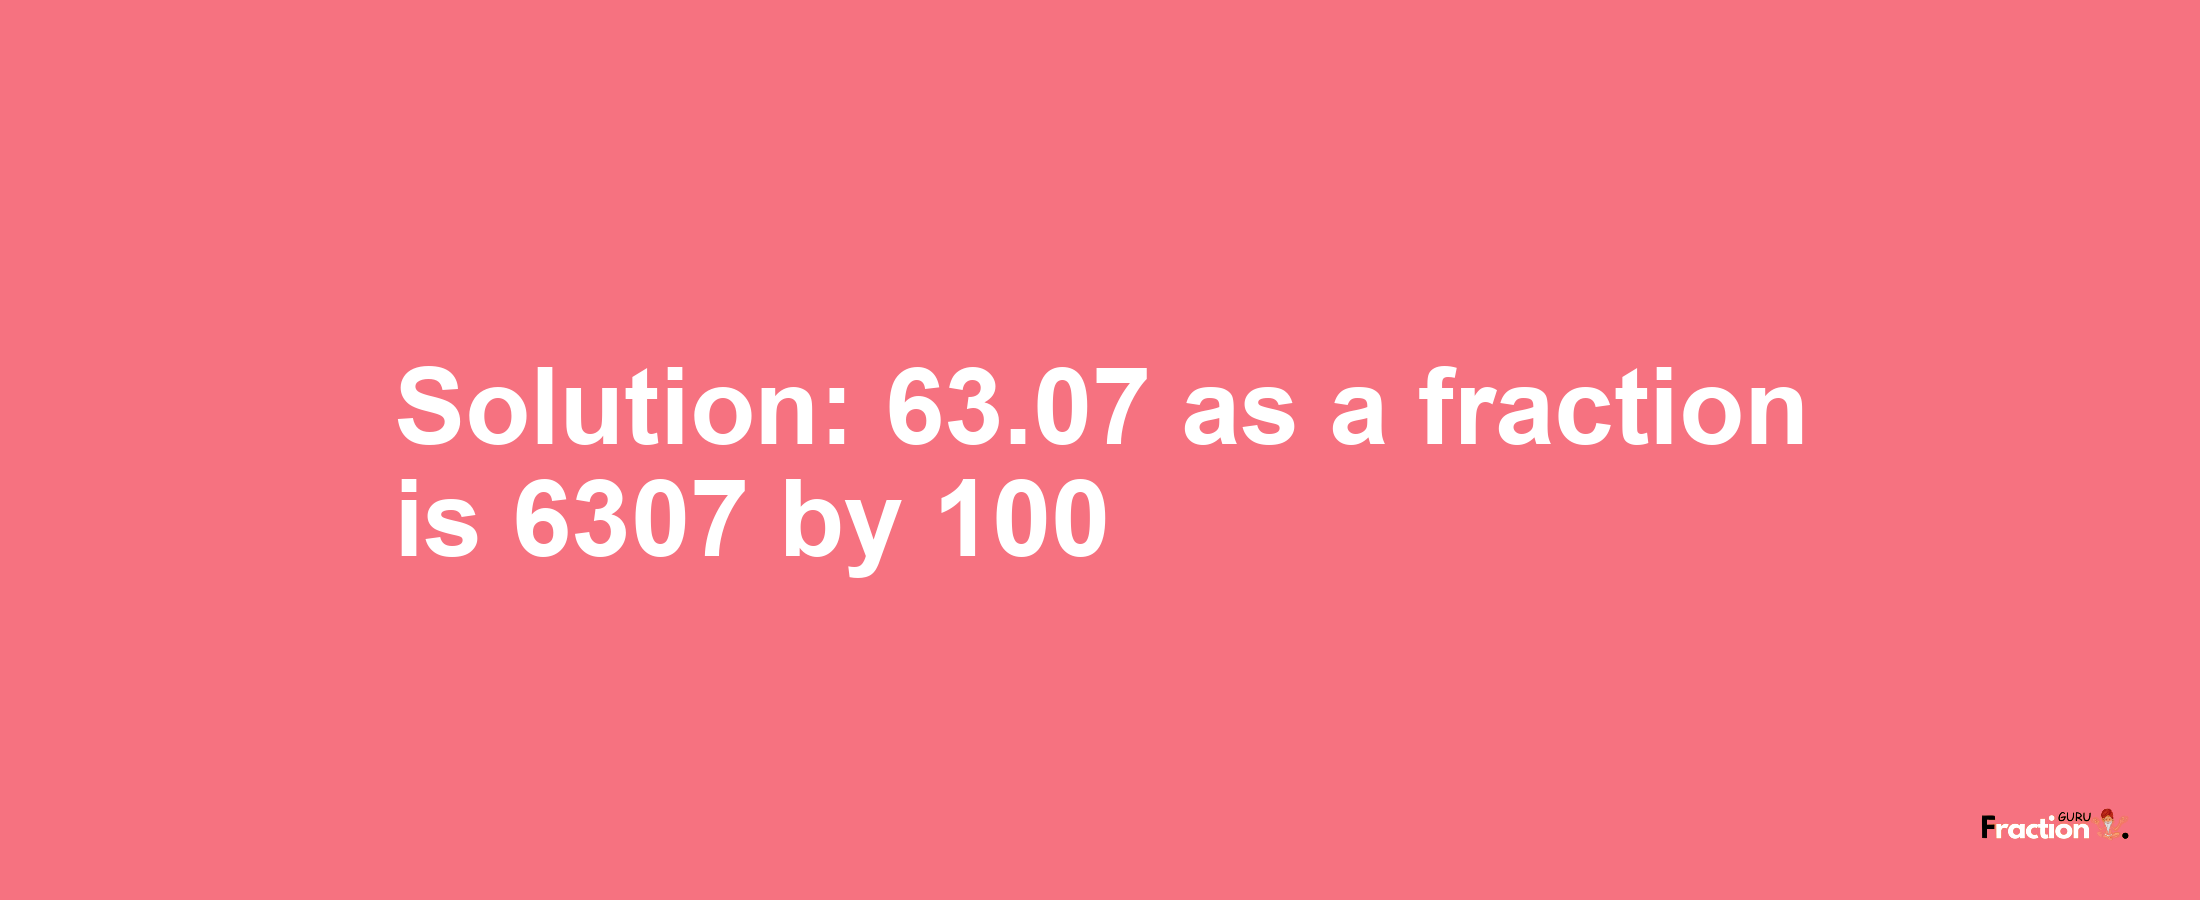 Solution:63.07 as a fraction is 6307/100